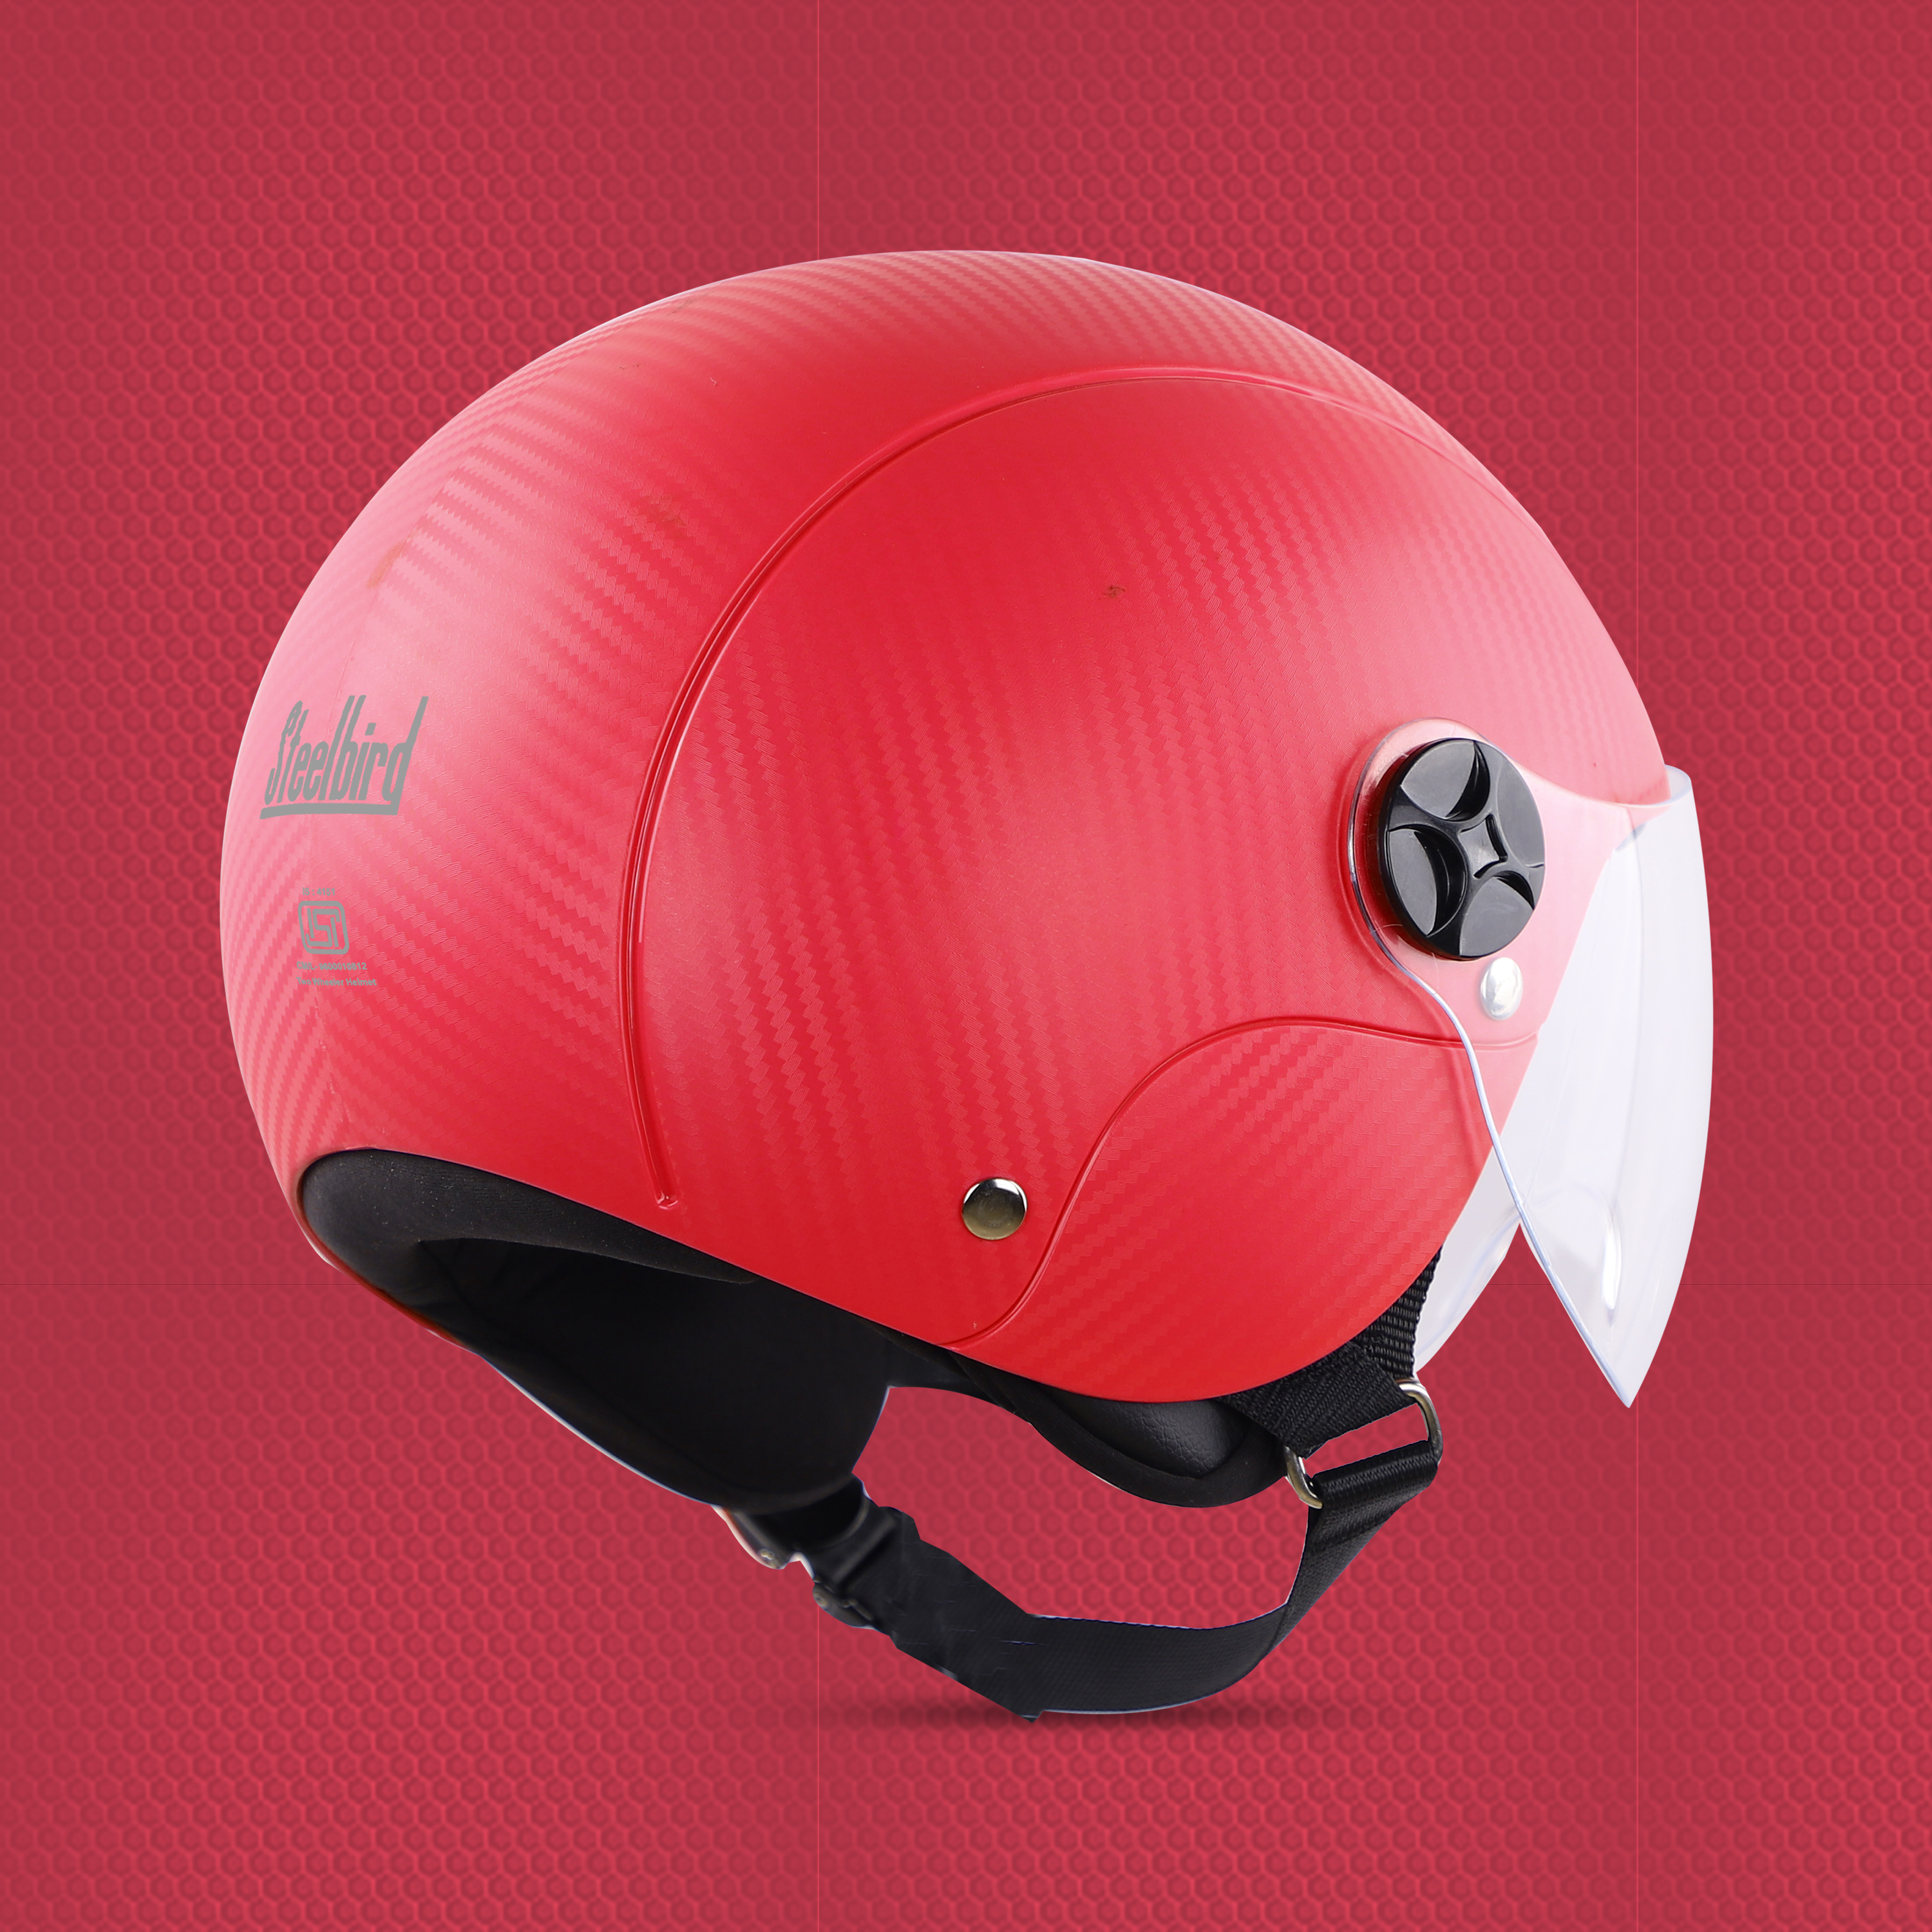 Steelbird SBH-16 Ruby ISI Certified Open Face Helmet (Dashing Red With Clear Visor)